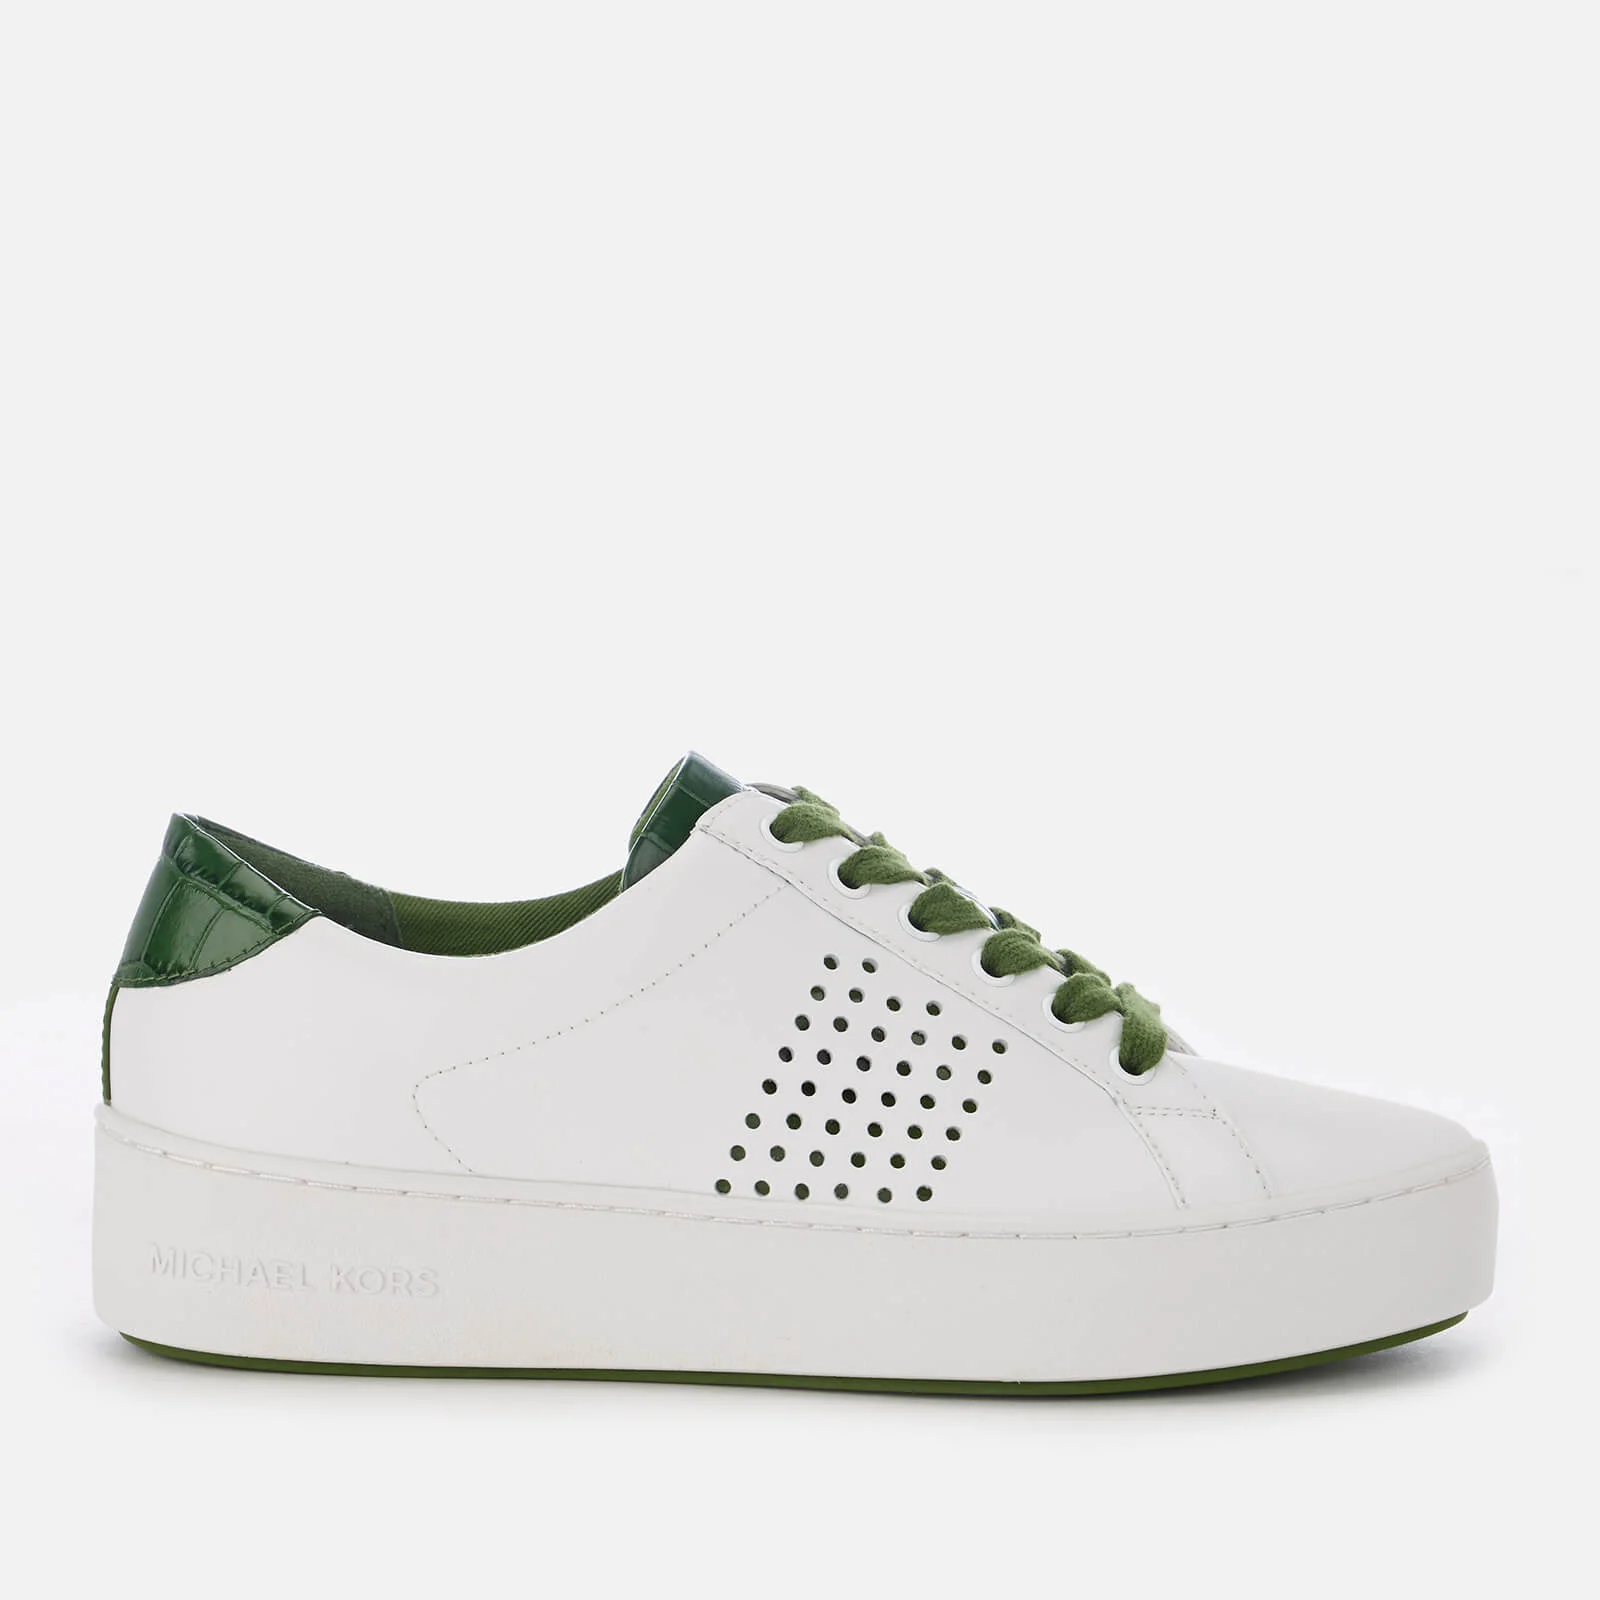 MICHAEL MICHAEL KORS Women's Poppy Perforated Leather Lace Up Trainers - Optic White/Green Image 1